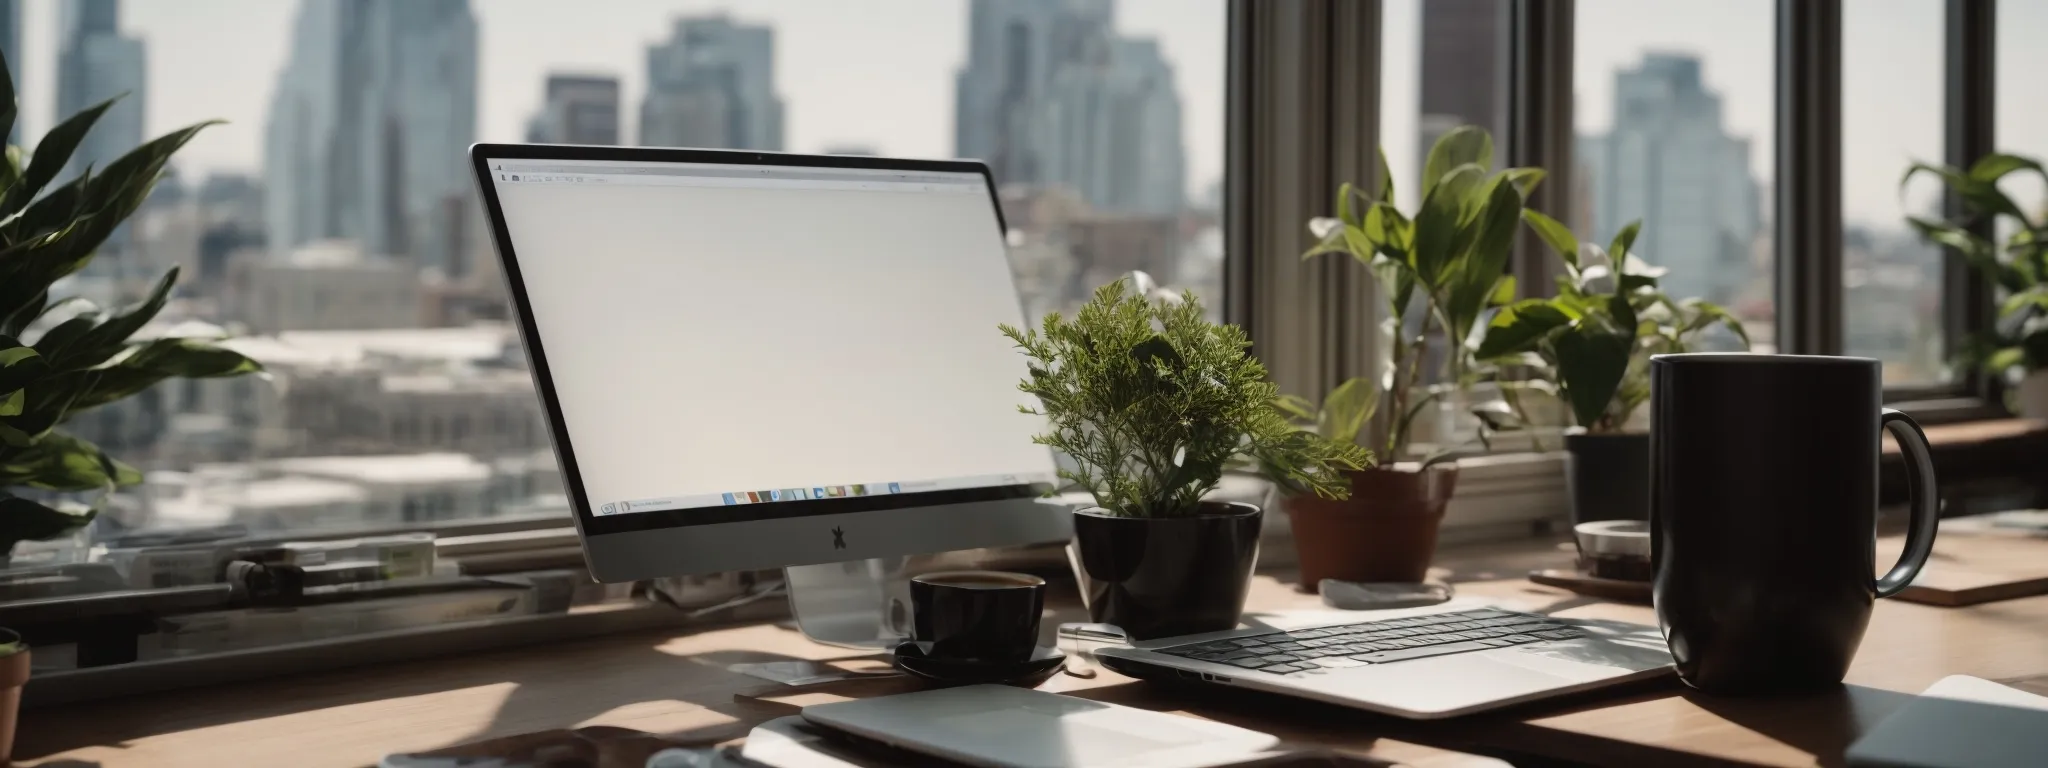 a laptop open on a desk surrounded by a notepad, a cup of coffee, and a plant, against a backdrop of a sunny window with city views.